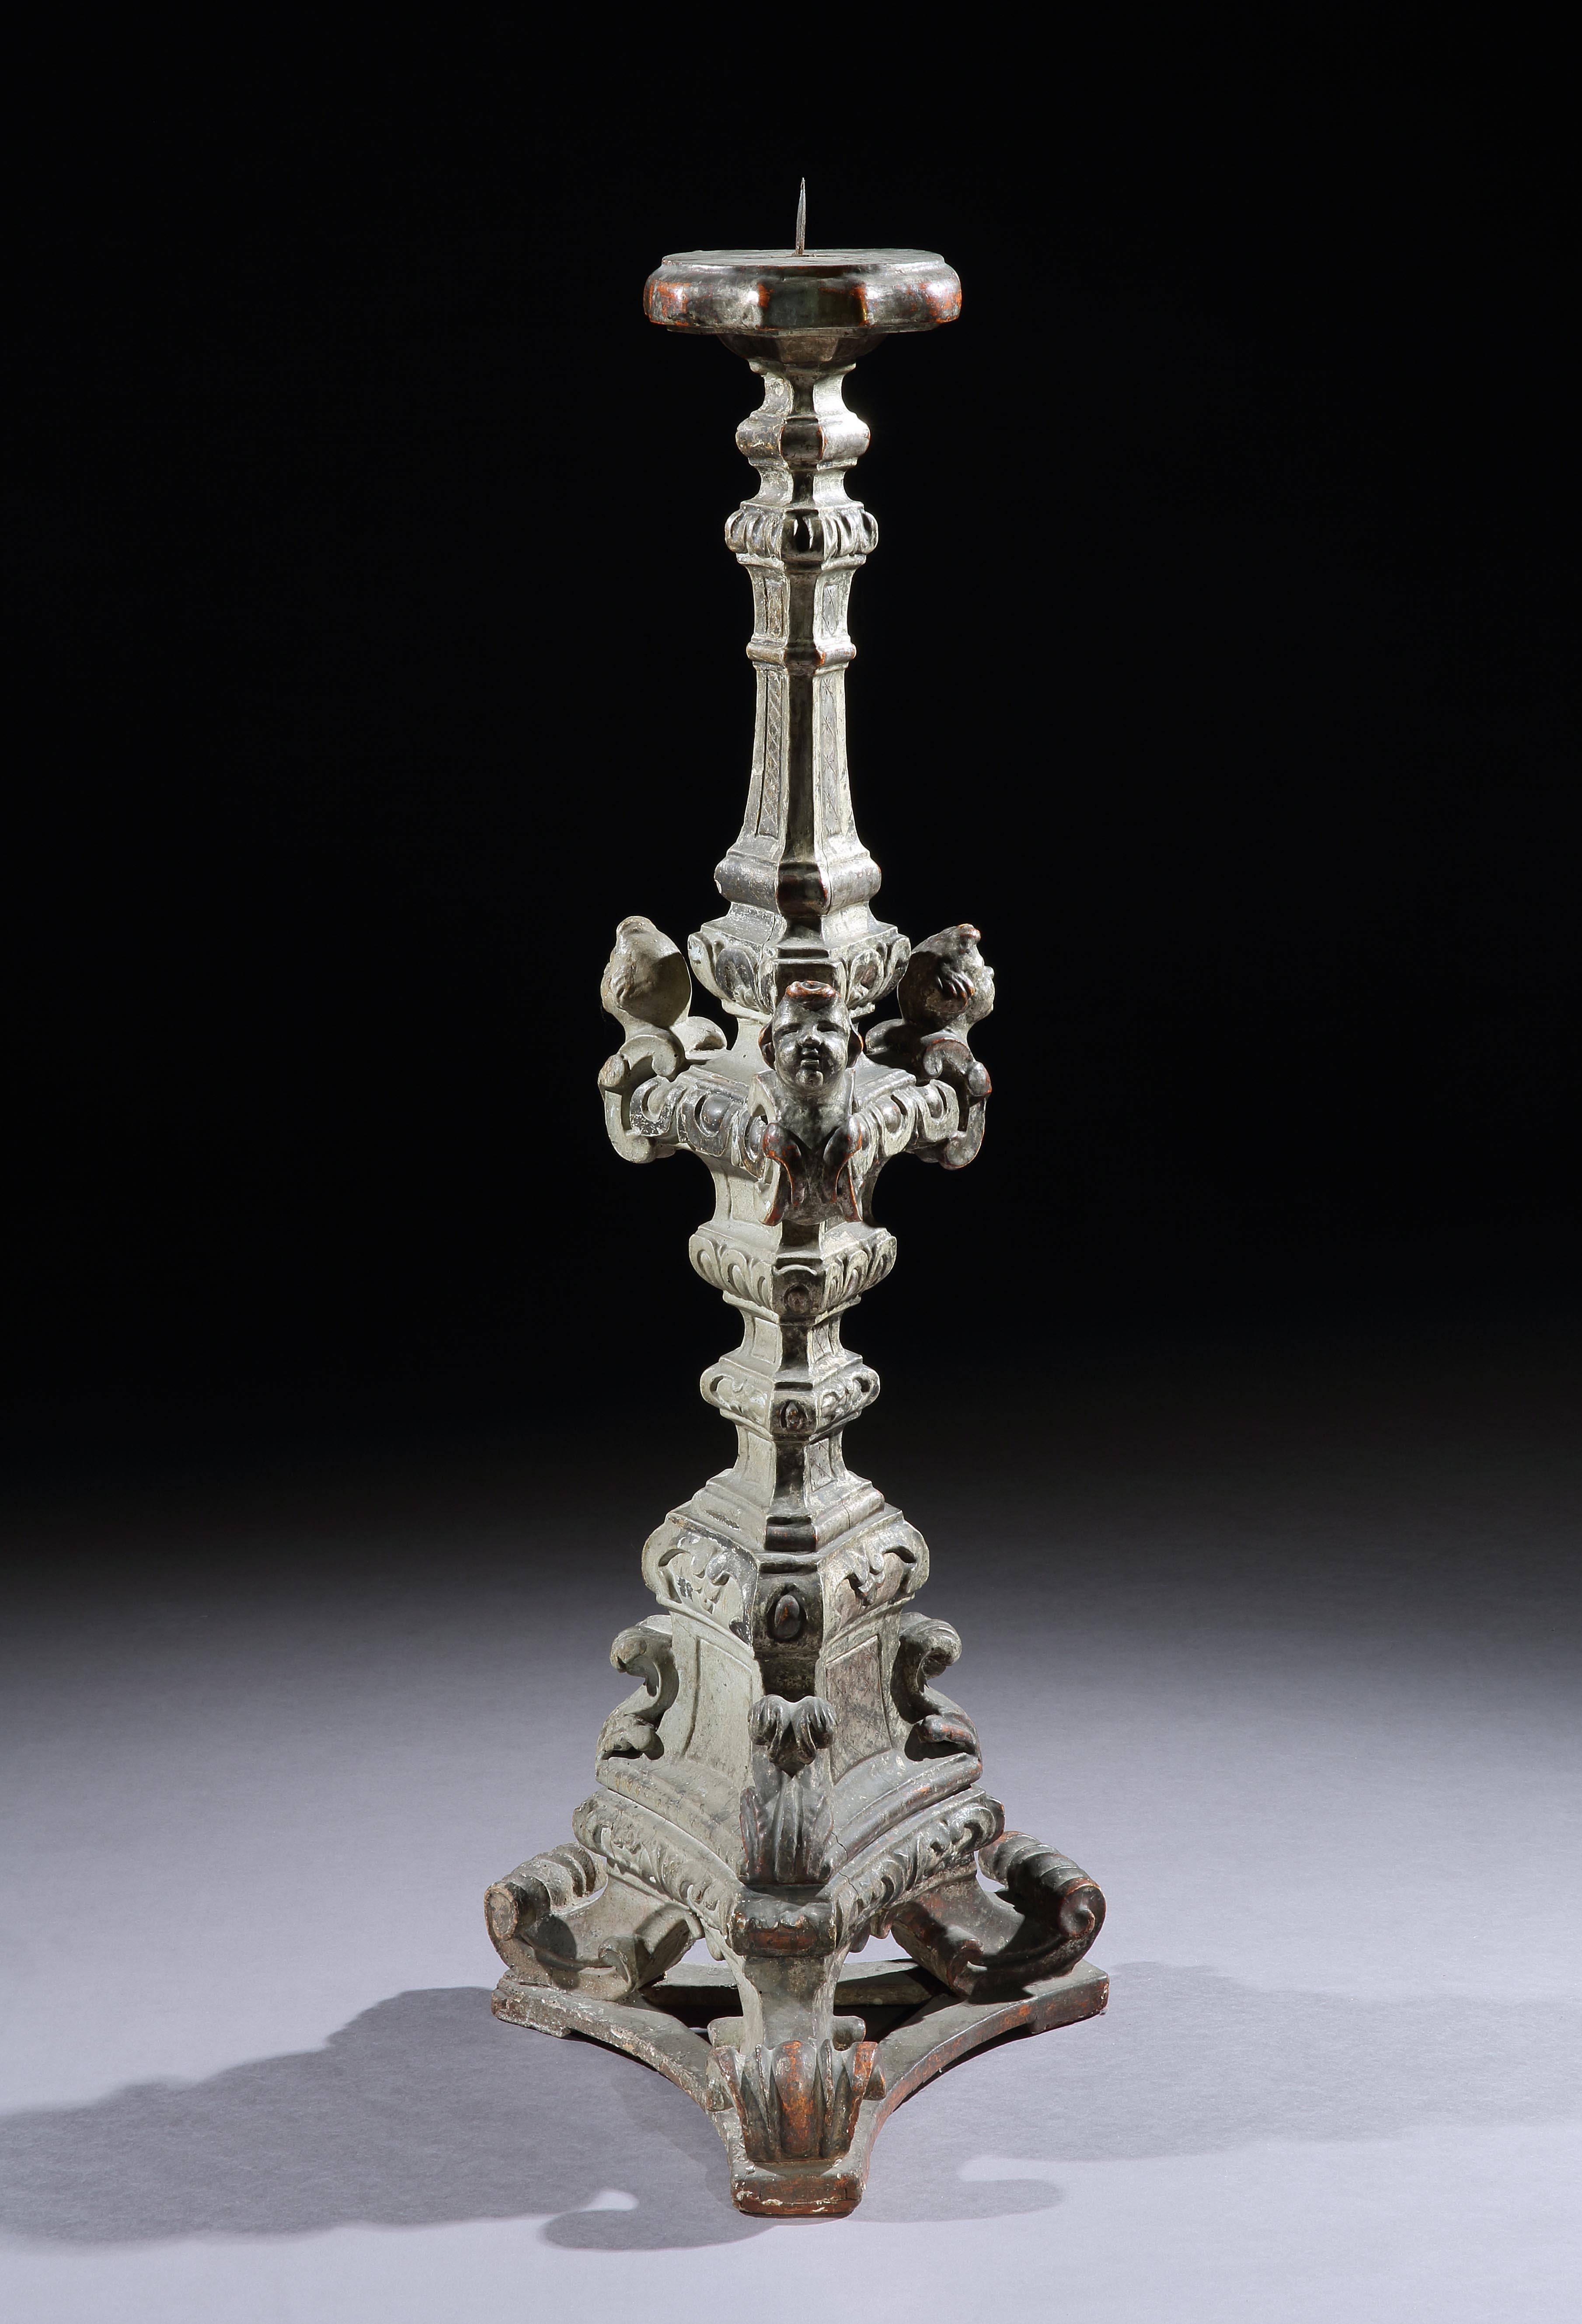 This massive torchere is characteristic of the baroque period in both the form and ornament employed. It would have glistened with the light reflecting from the matt and burnished silvered surfaces. It is an impressive piece injecting gravitas into